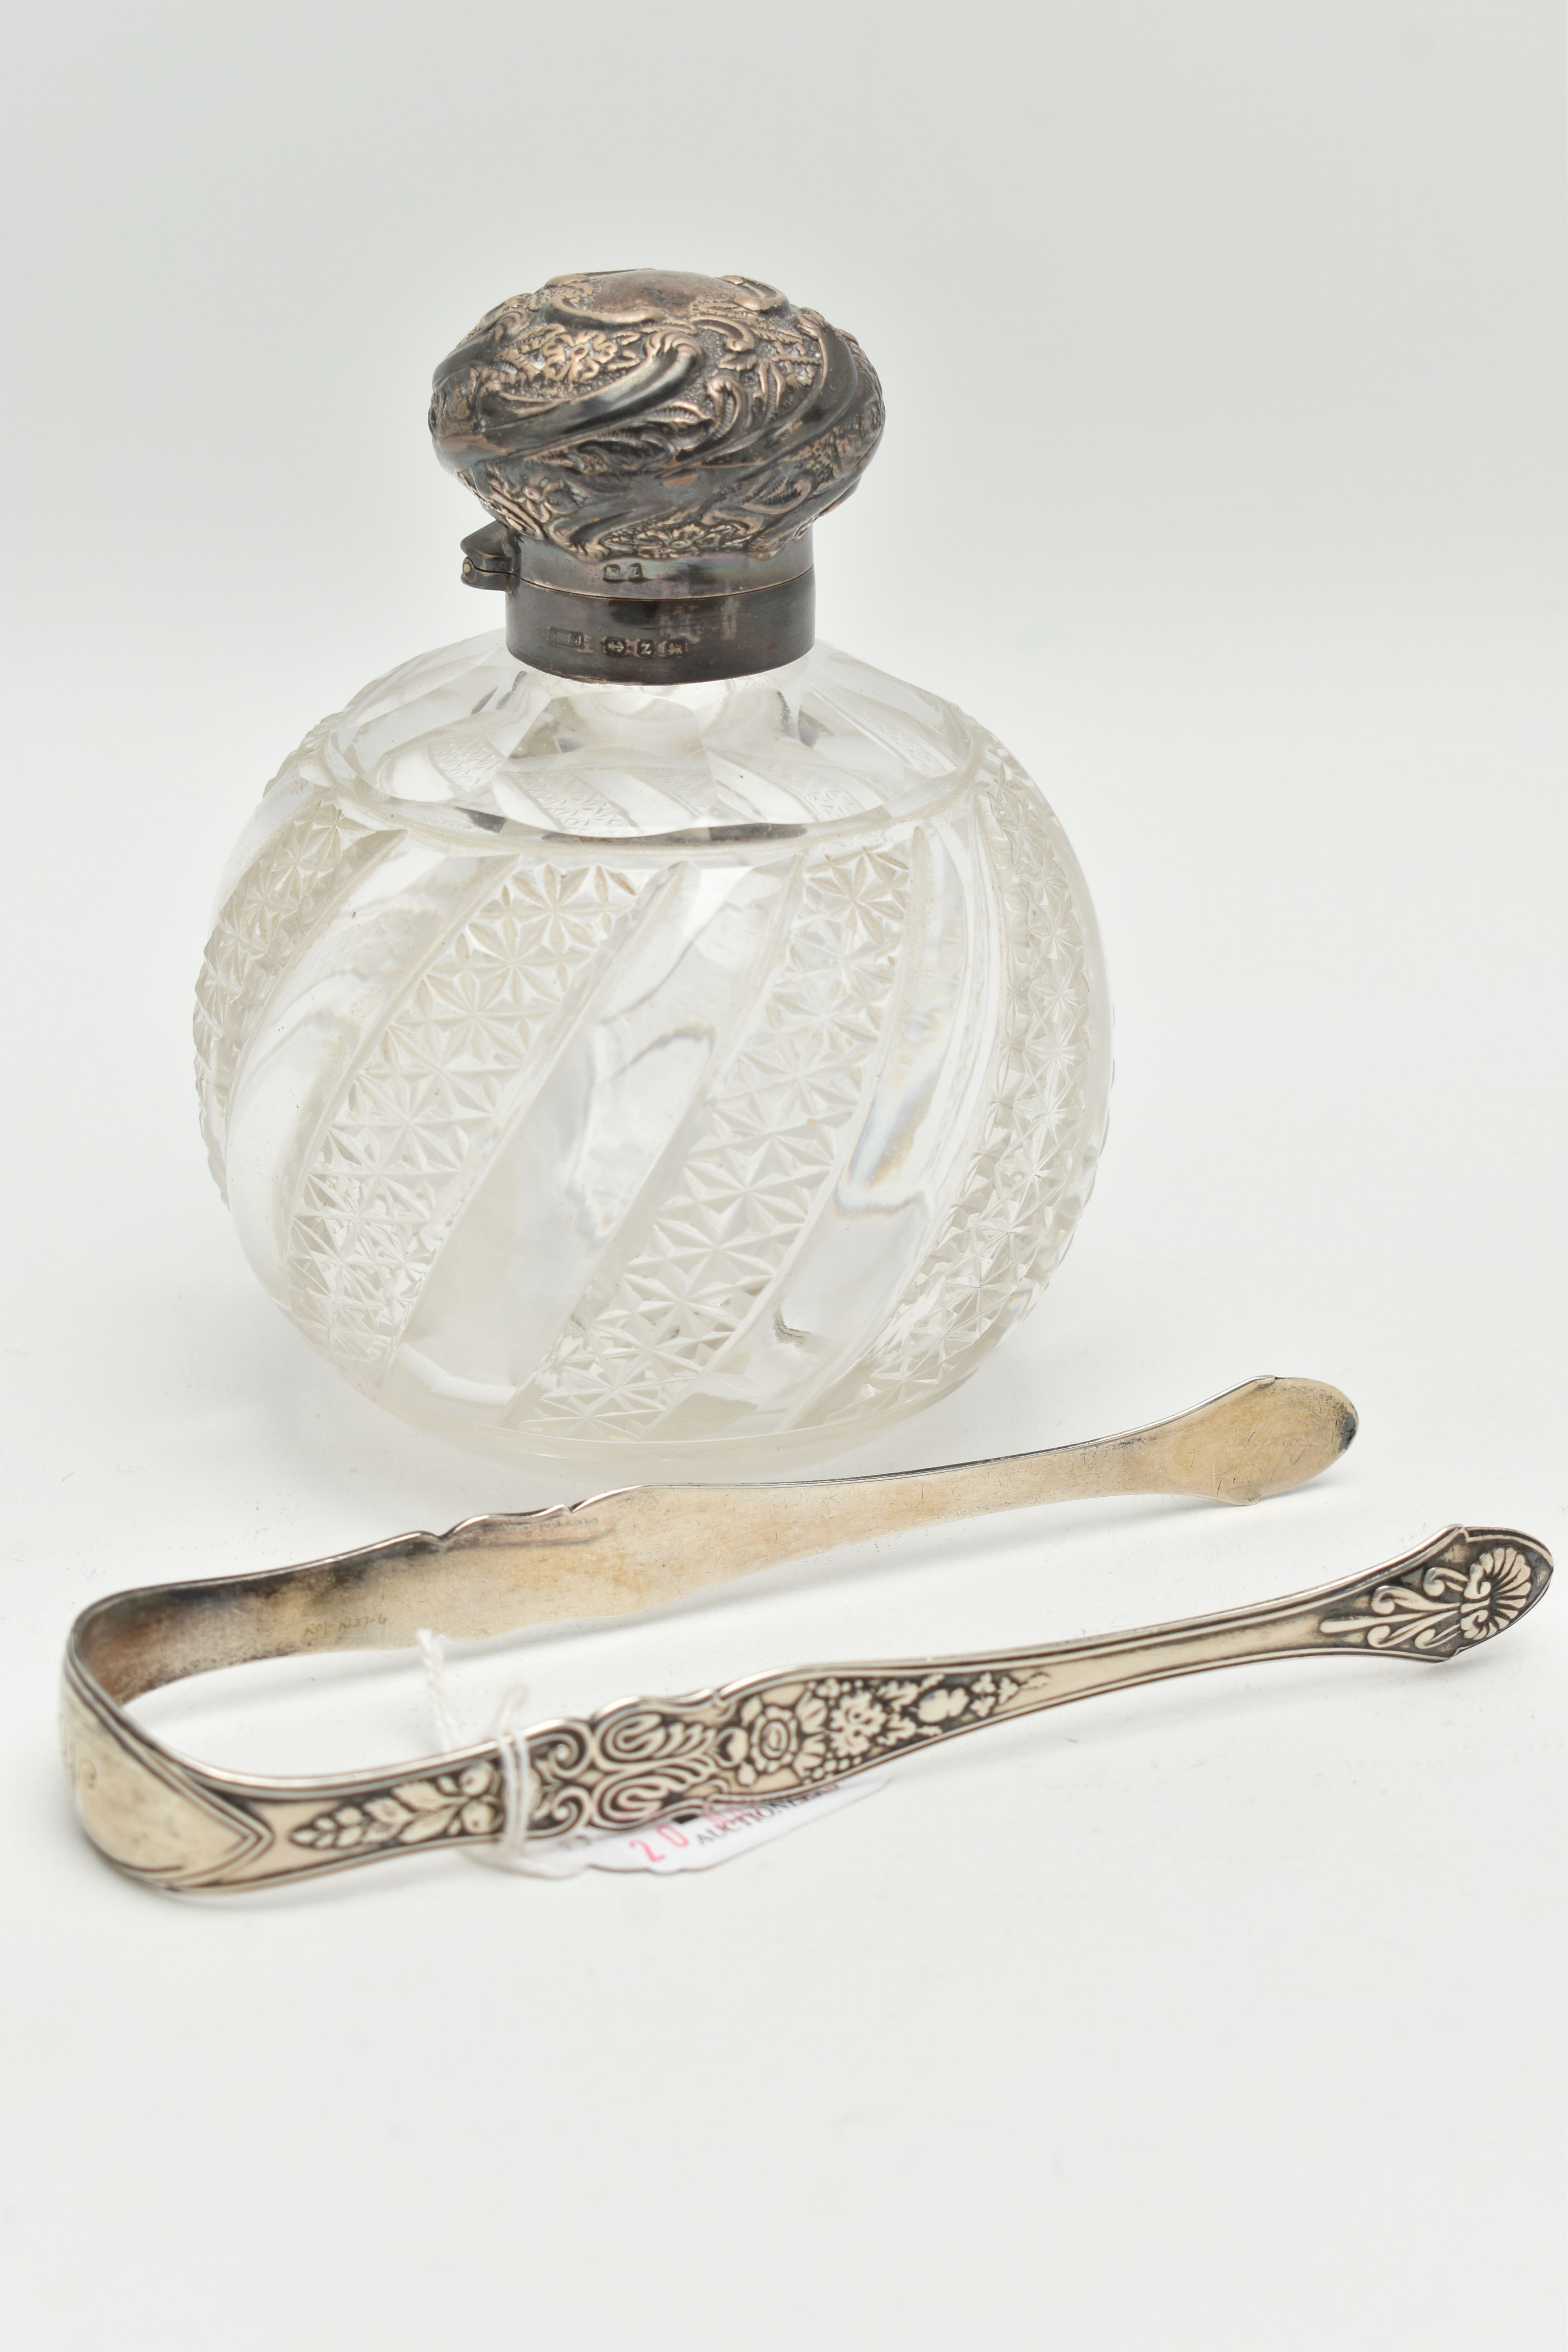 A PAIR OF SILVER SUGAR TONGS AND A SCENT BOTTLE, floral and fruit pattern tongs with engraved